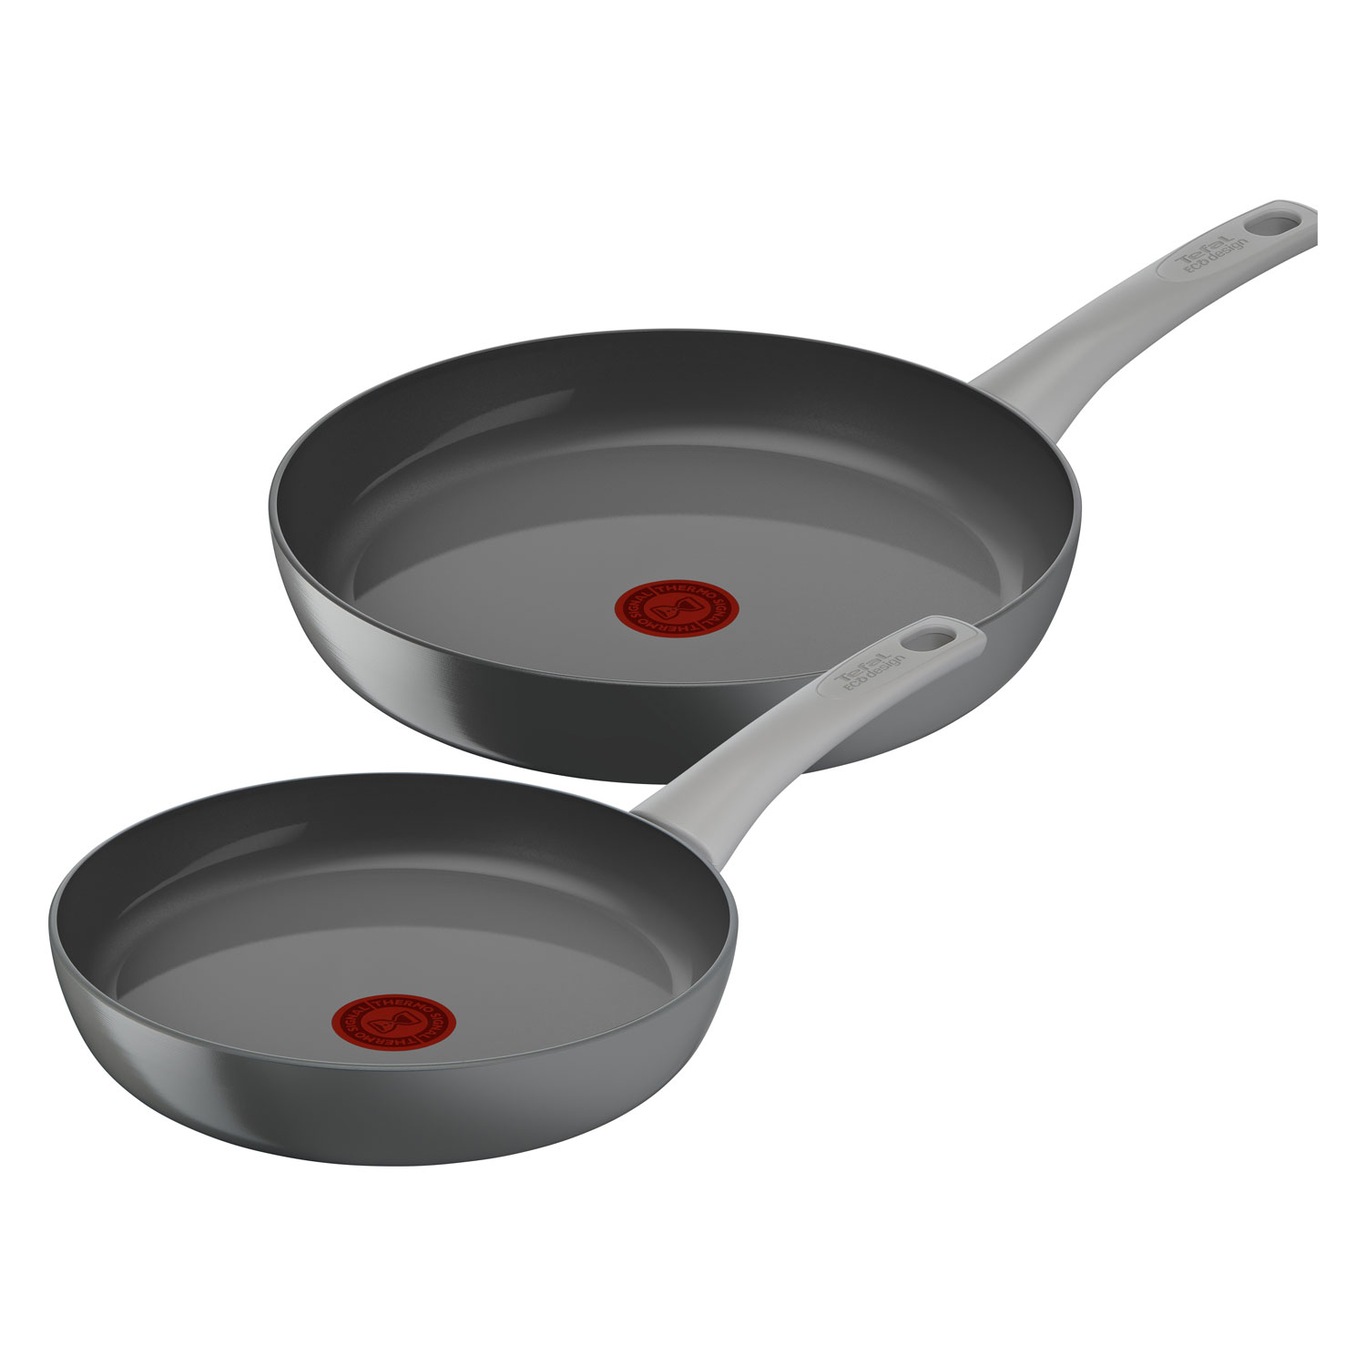 Renew ON Frying Pan, 2 Pieces